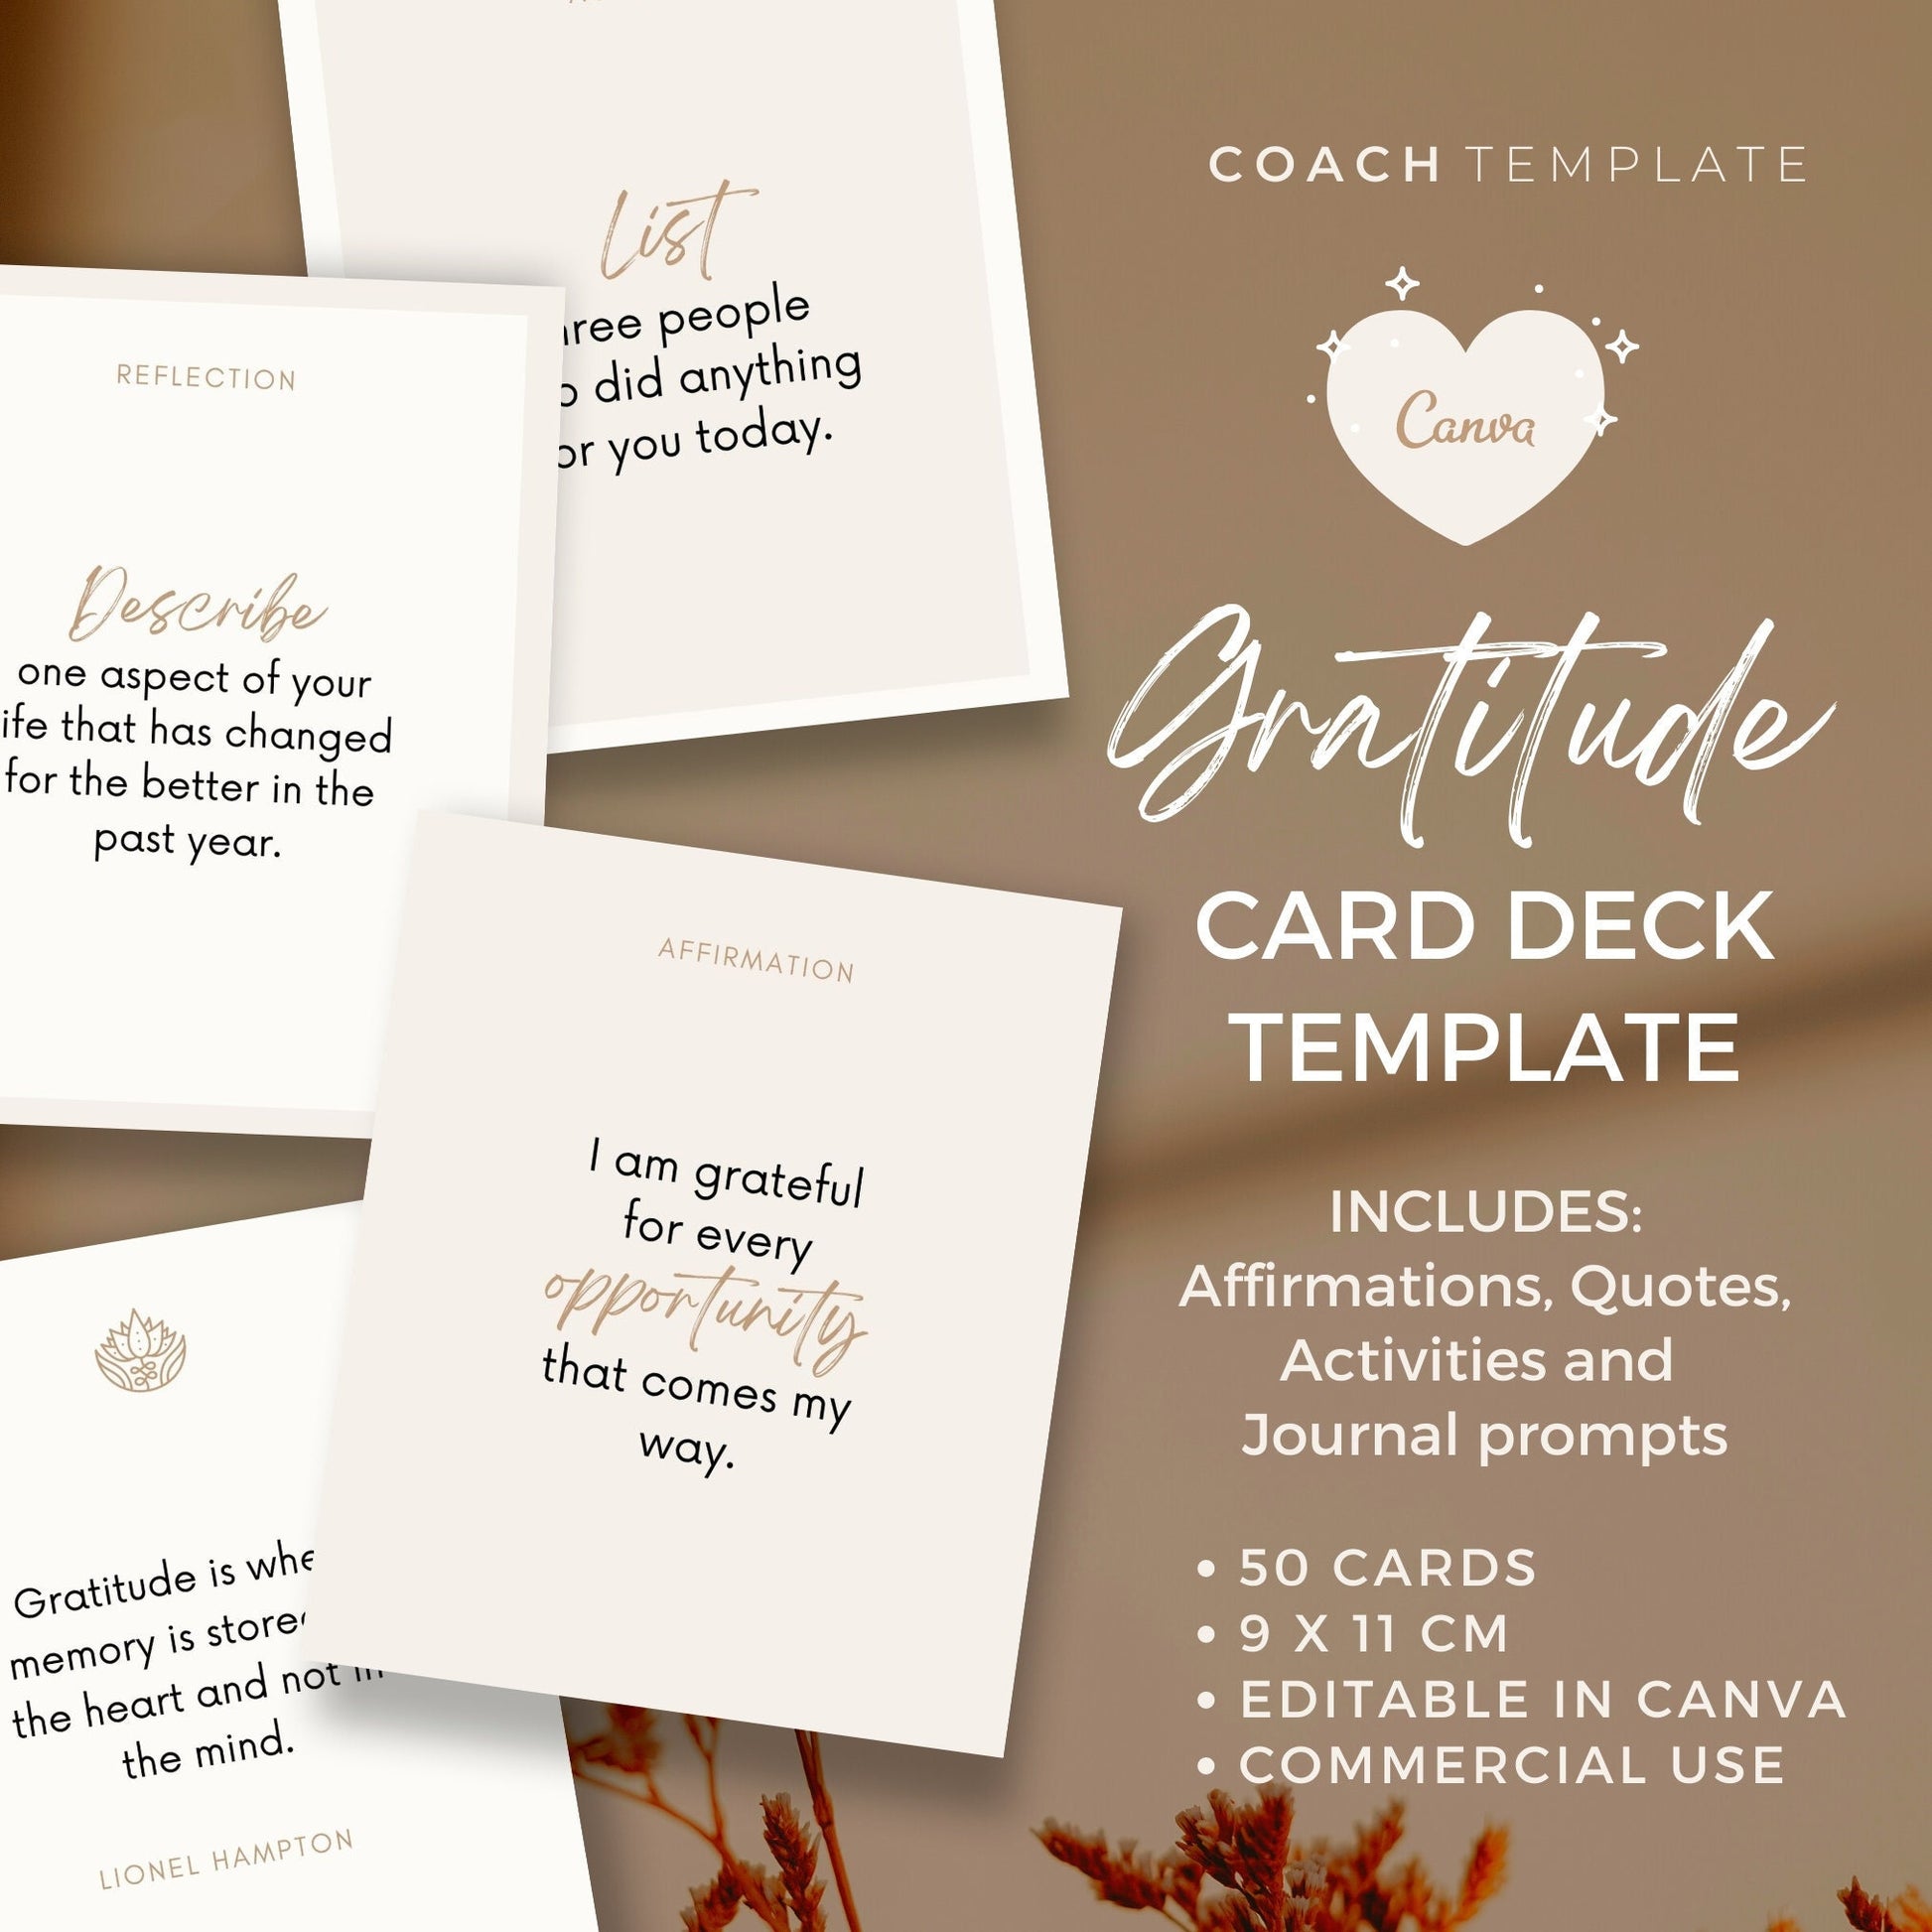 Gratitude Card Deck Canva Template | Gratefulness Affirmation Quote Activity Journal Prompt | Spiritual Life Wellness Coach | Commercial Use